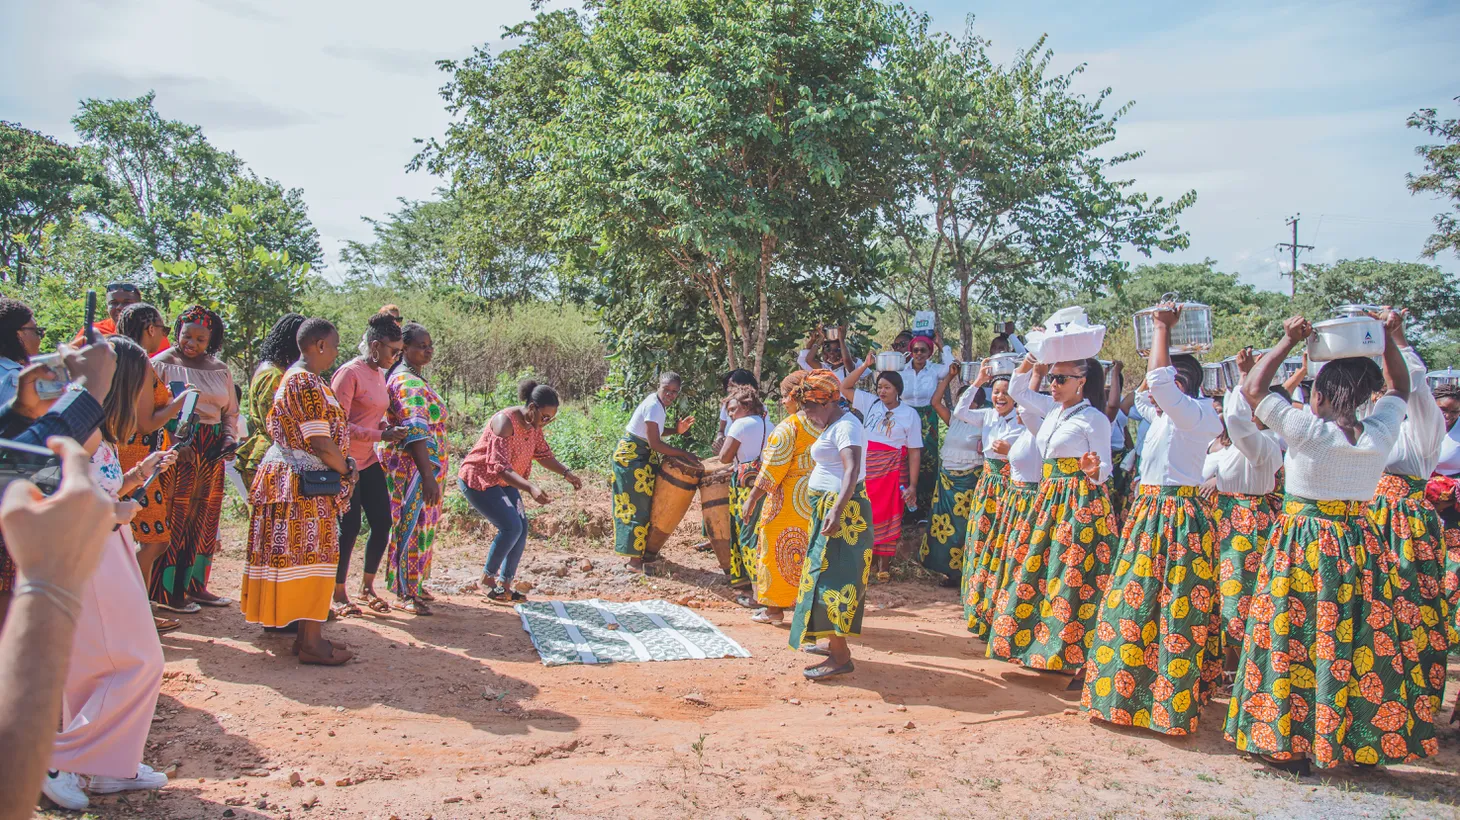 In Zambia, ichilanga mulilo is part of traditional wedding celebrations, whereby representatives of the bride (here in matching fabrics) cook for the groom’s friends and family.